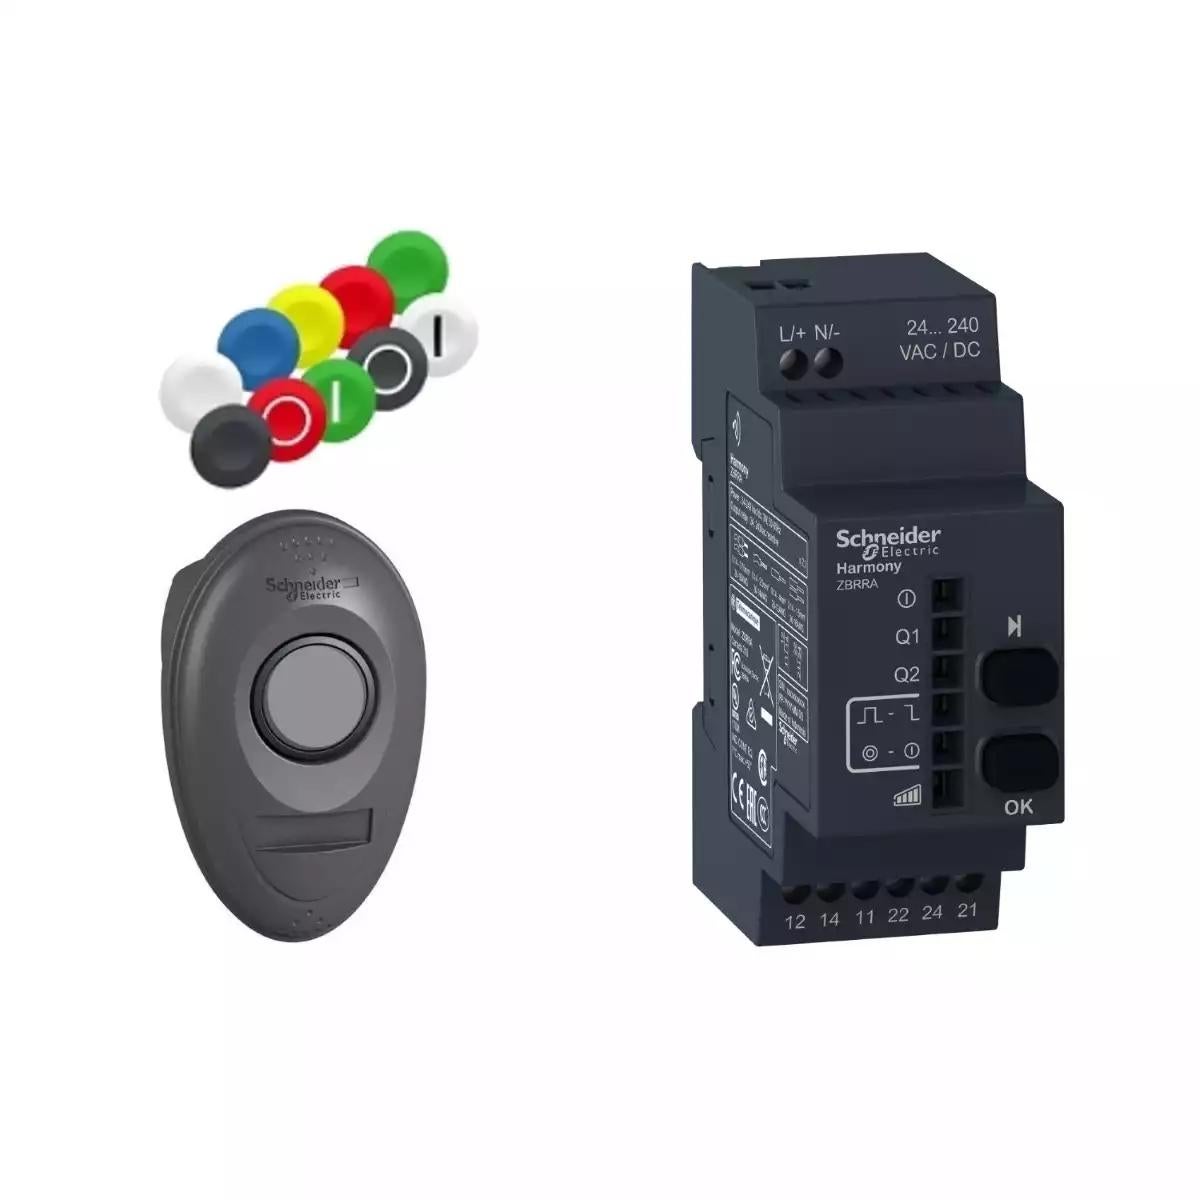 Harmony XB5, Pack with 1 wireless push button + 1 configurable receiver + 1 set of 10 colored caps, plastic, Ø22, 24...240 V AC/DC